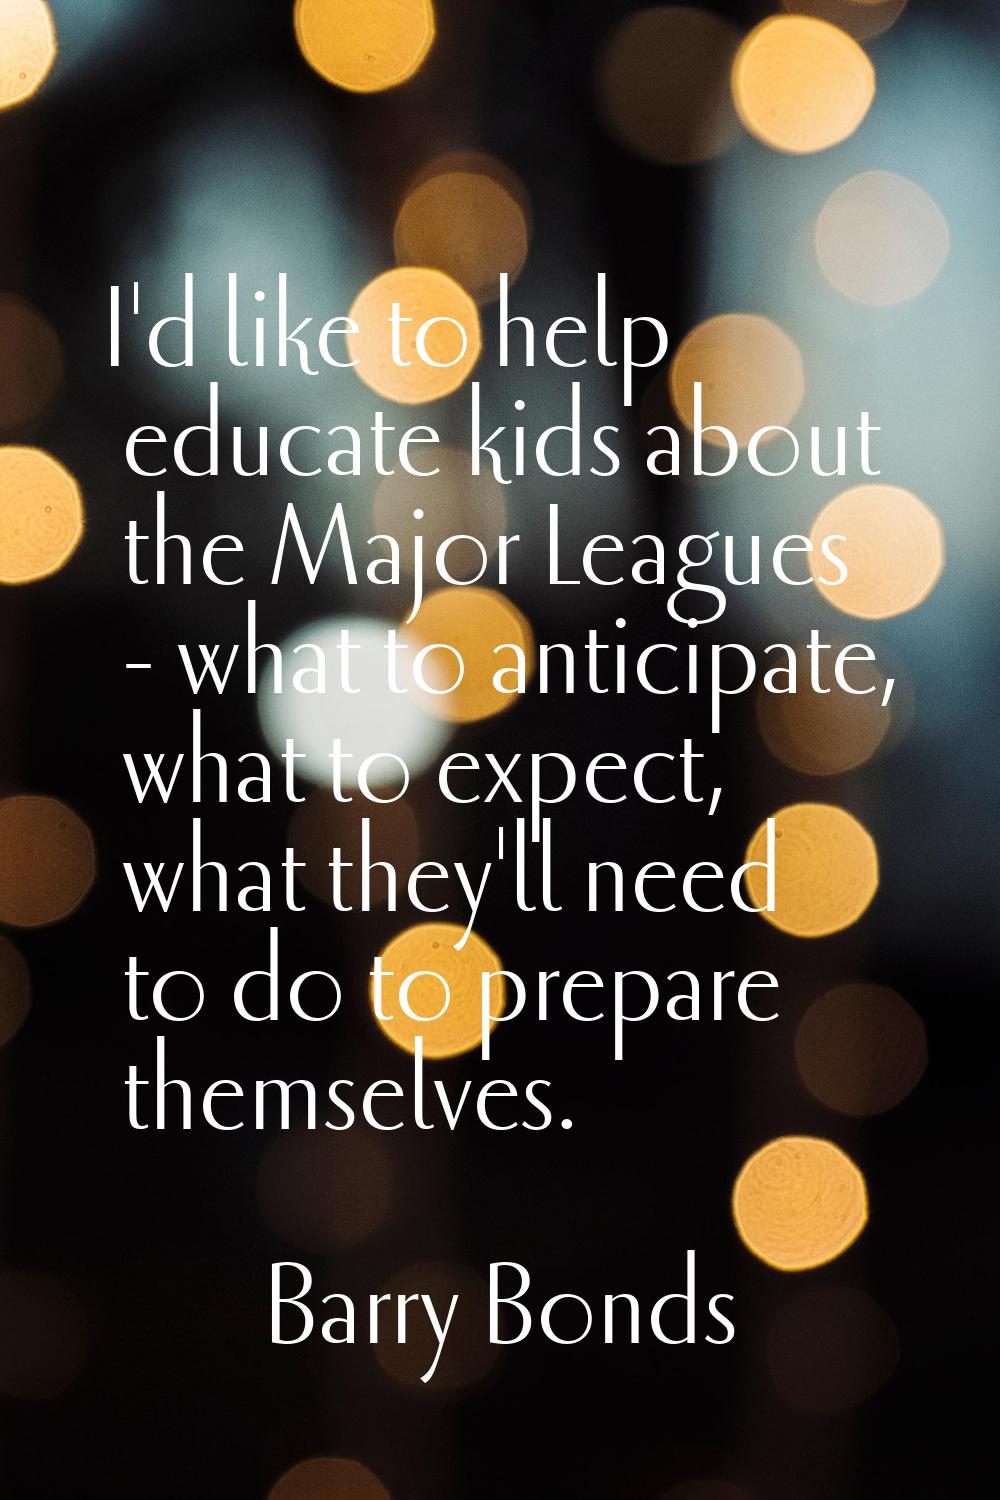 I'd like to help educate kids about the Major Leagues - what to anticipate, what to expect, what th